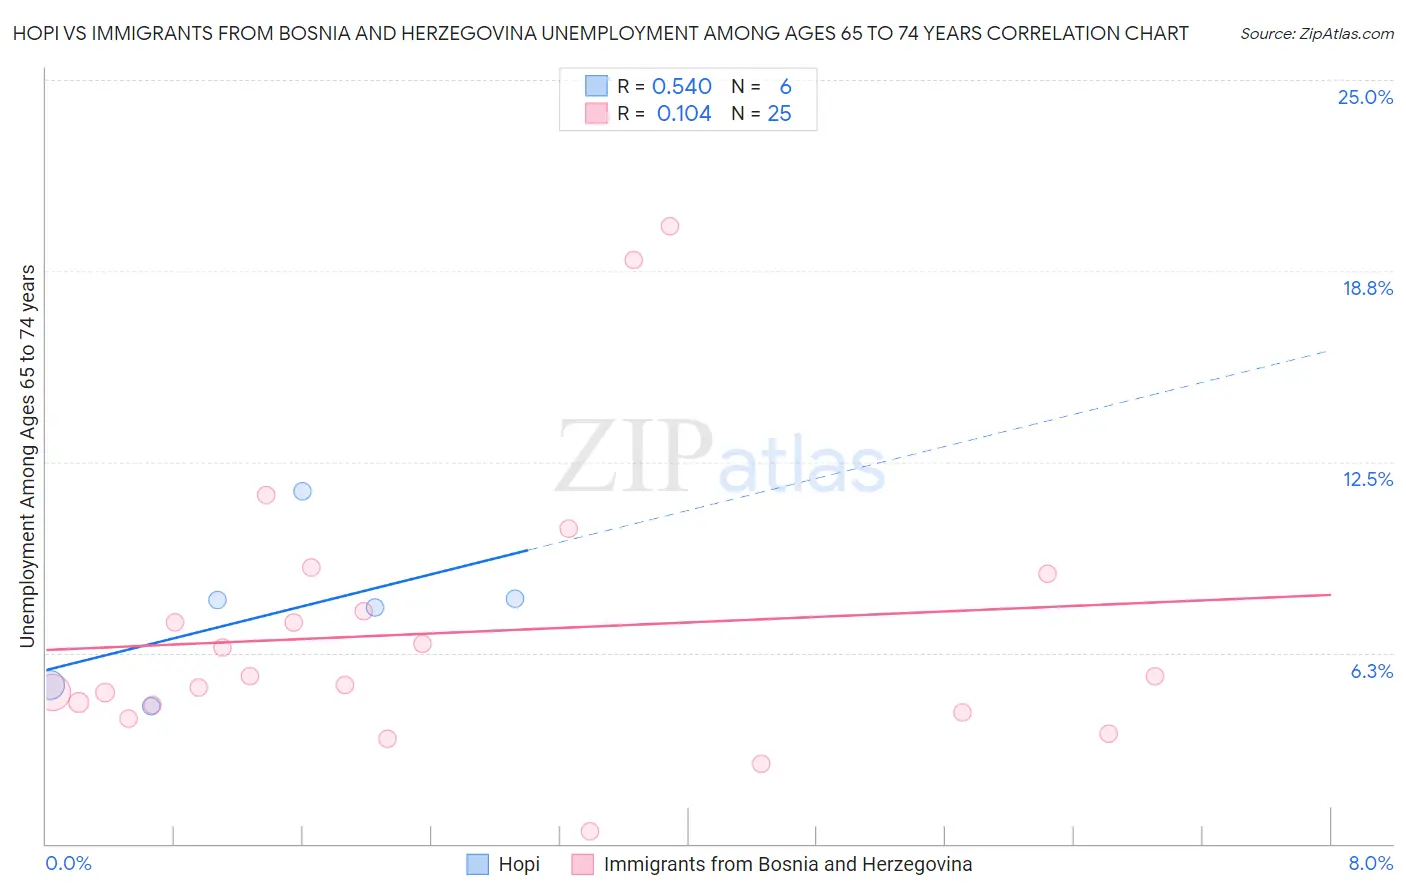 Hopi vs Immigrants from Bosnia and Herzegovina Unemployment Among Ages 65 to 74 years